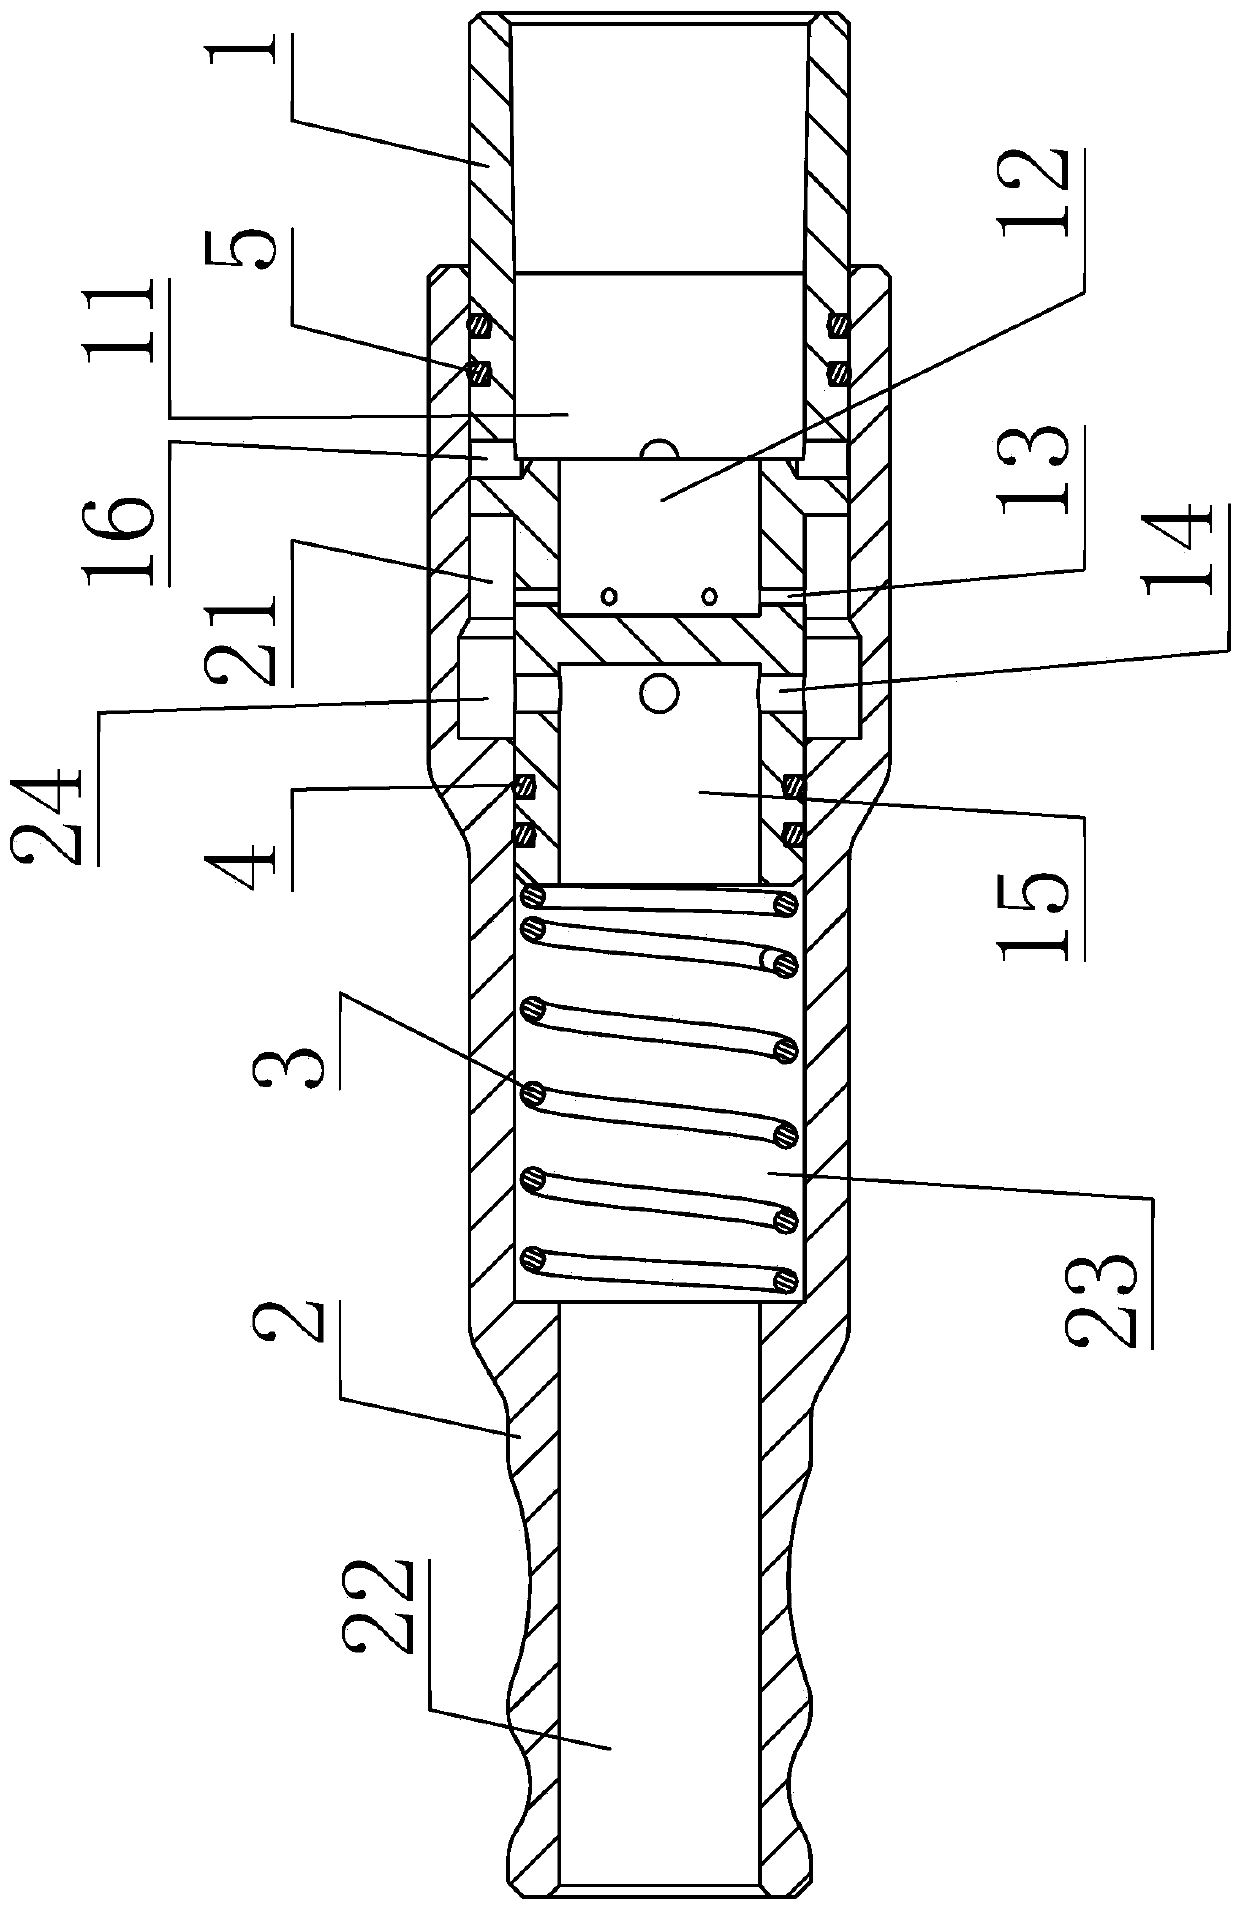 Variable-cavity-volume cigarette holder with tar extruded out in pushing mode